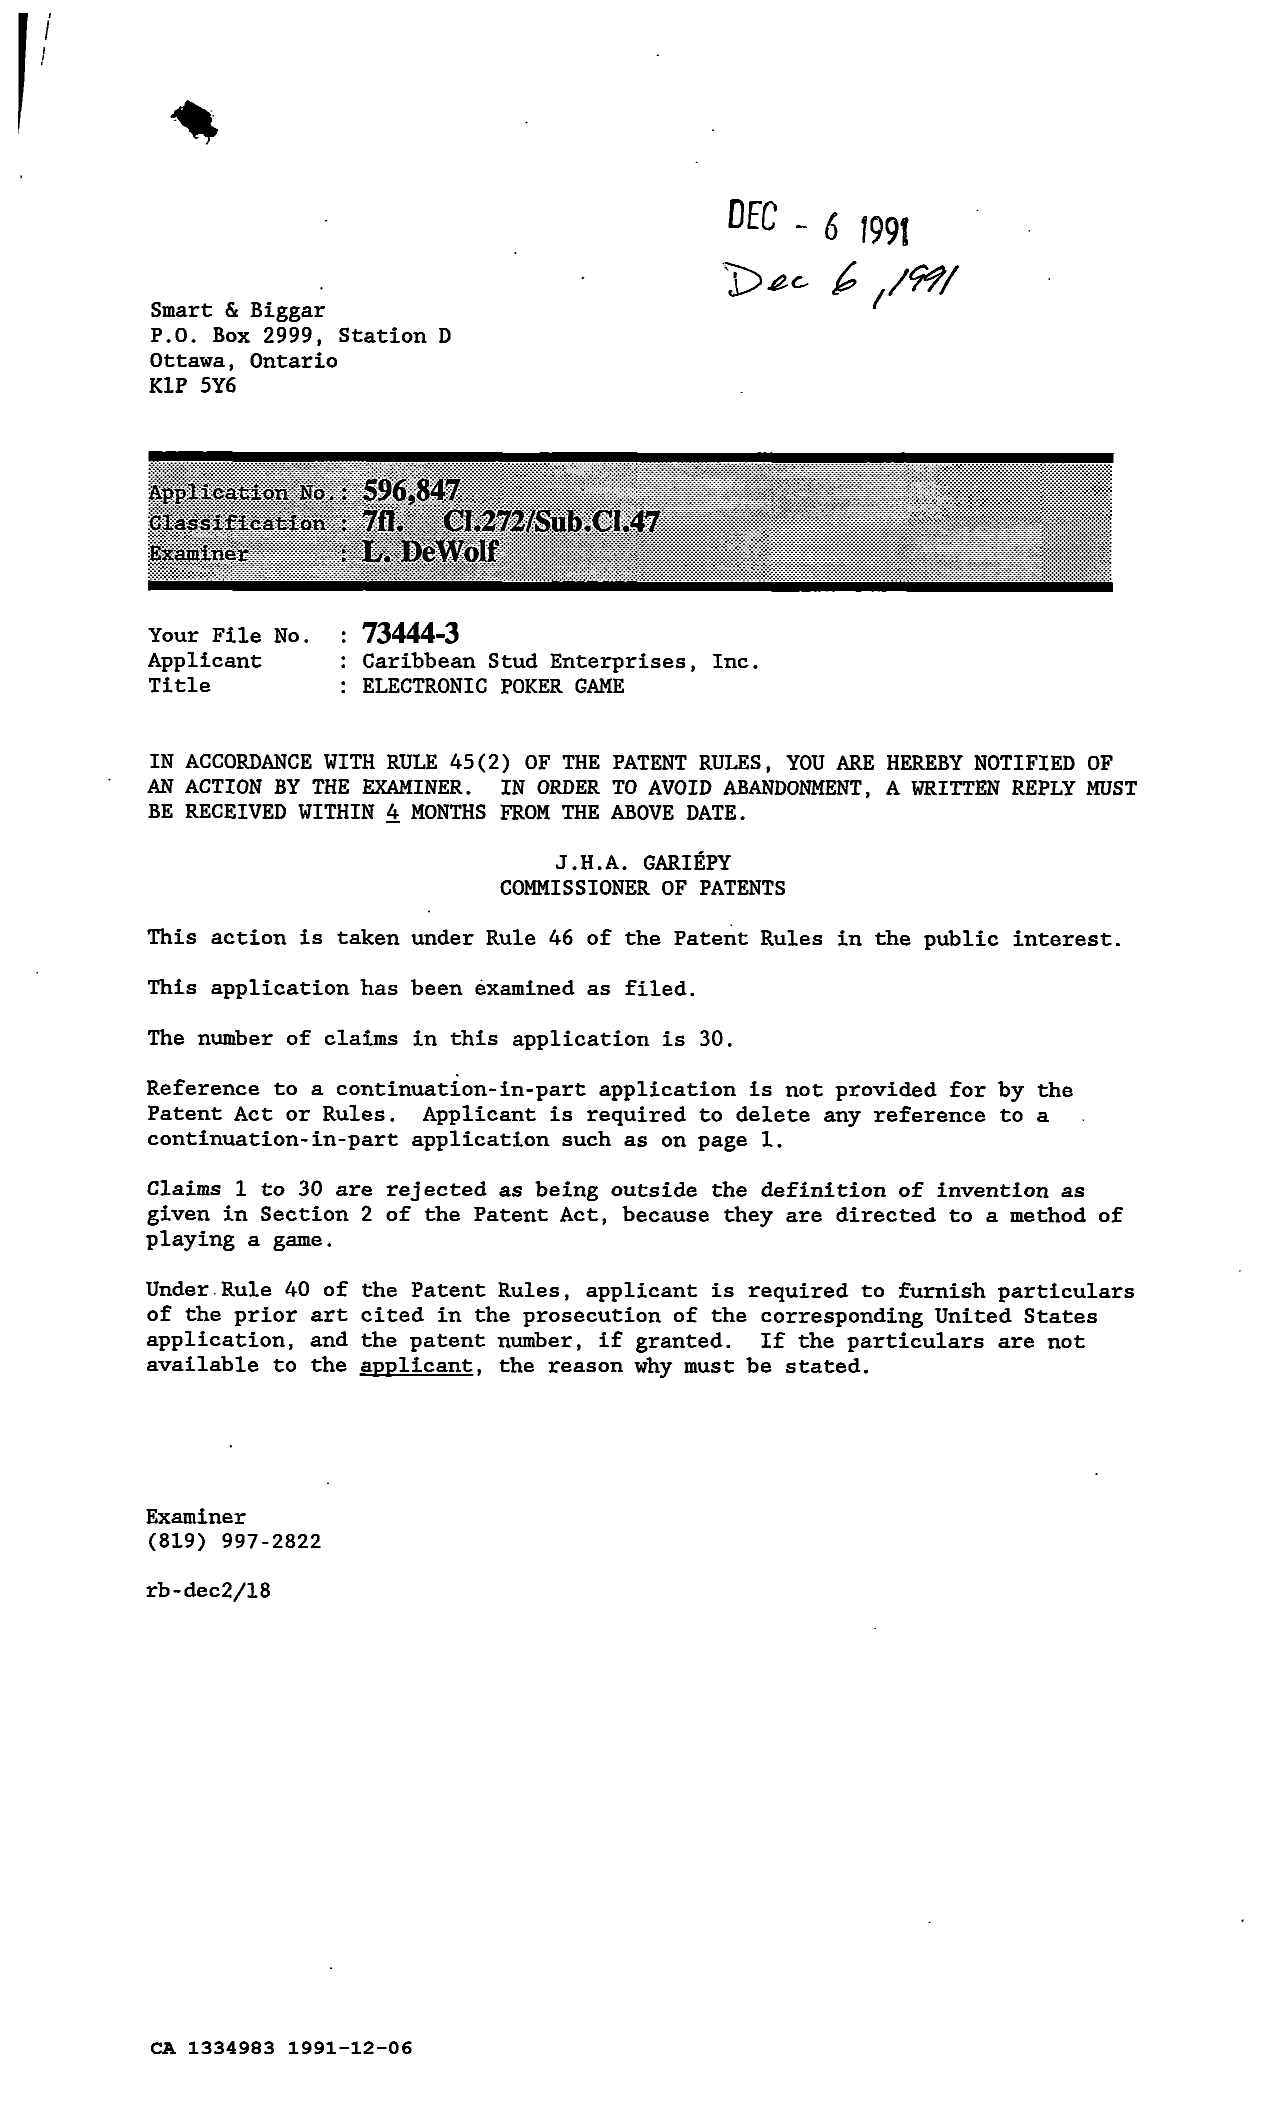 Canadian Patent Document 1334983. Examiner Requisition 19911206. Image 1 of 1